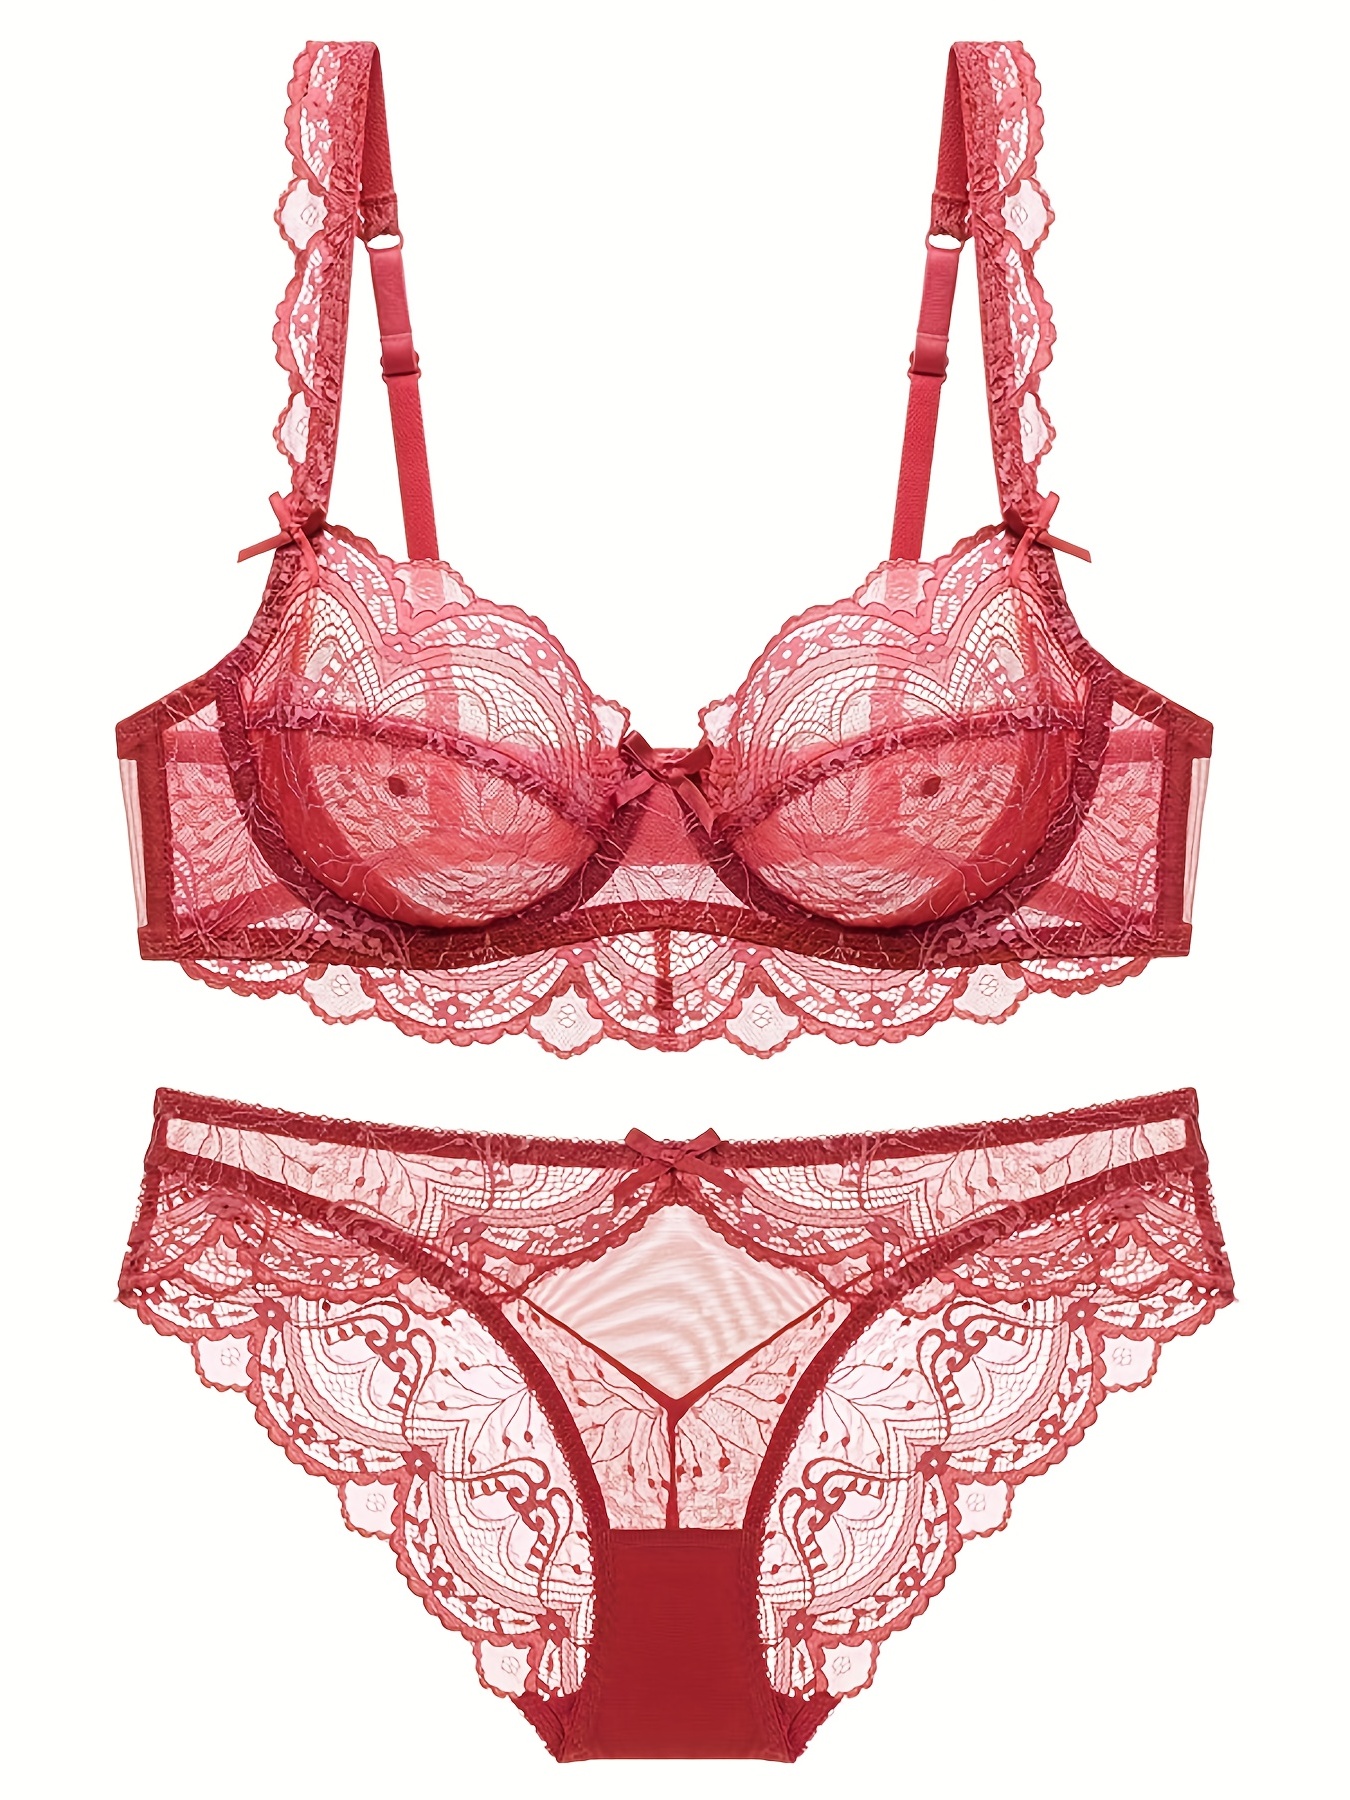 Buy Super X Designer Women's Bra Panty Set Lace Push Up Underwired Solid Lingerie  Set Baby Doll Bikini Set for Women Lingerie Set for Women & Girls (34,  Maroon) at